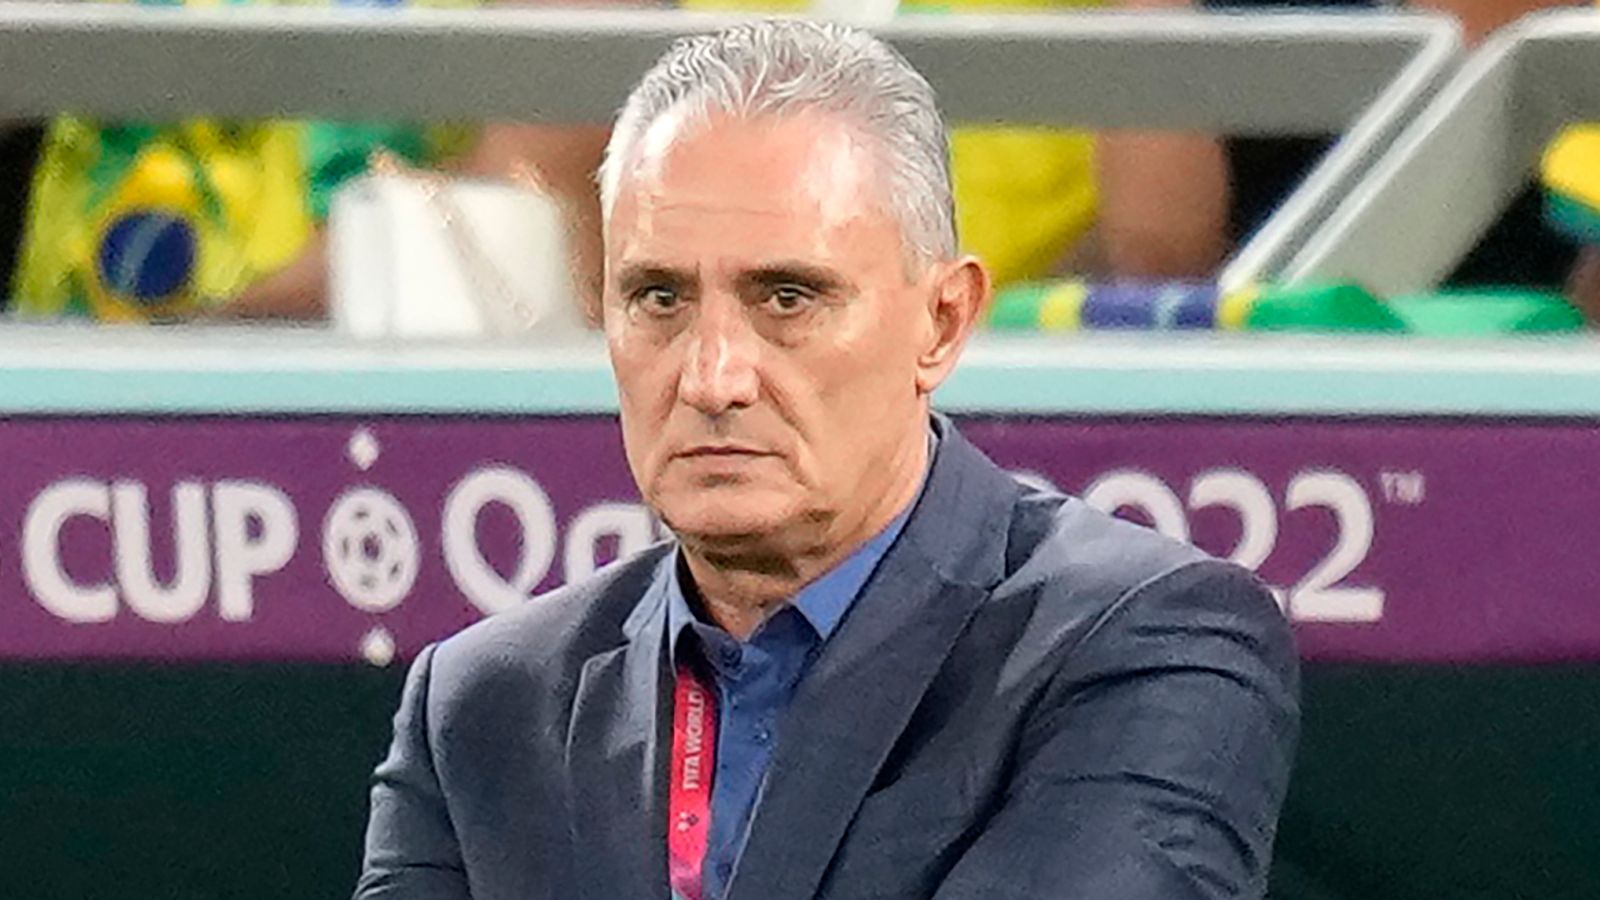 Brazil head coach Tite leaves role after World Cup exit to Croatia | Football News